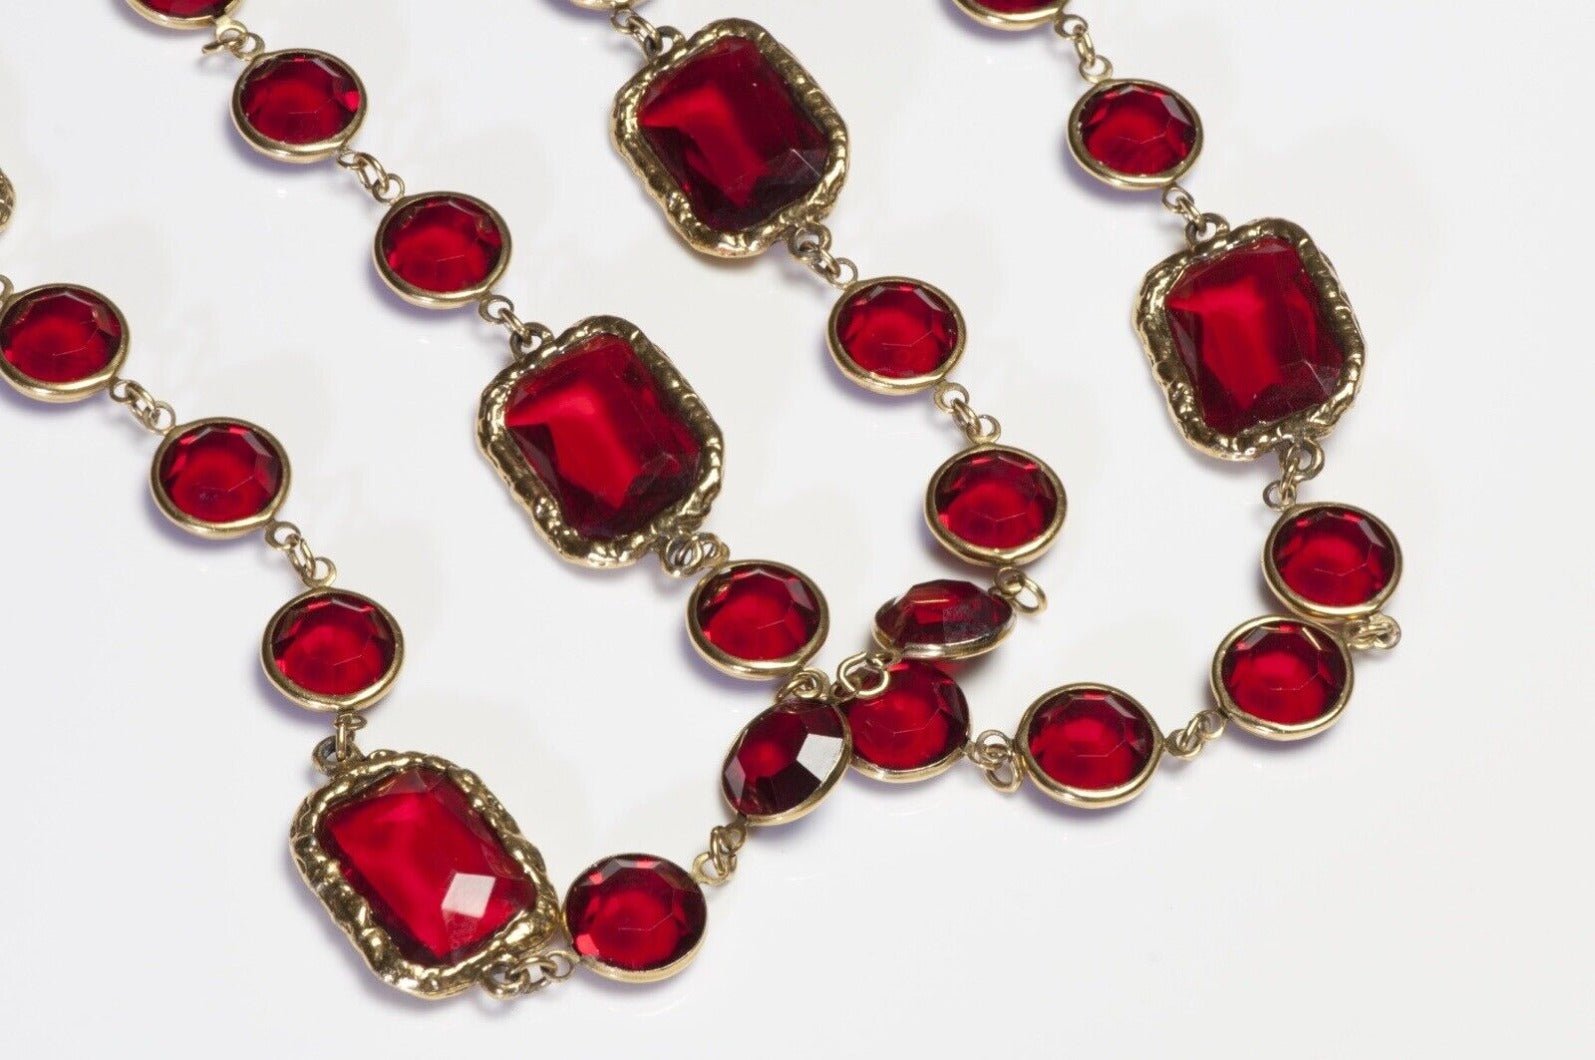 Vintage 1981 Chanel Paris Red Crystal Chiclet Chain Sautoir Necklace